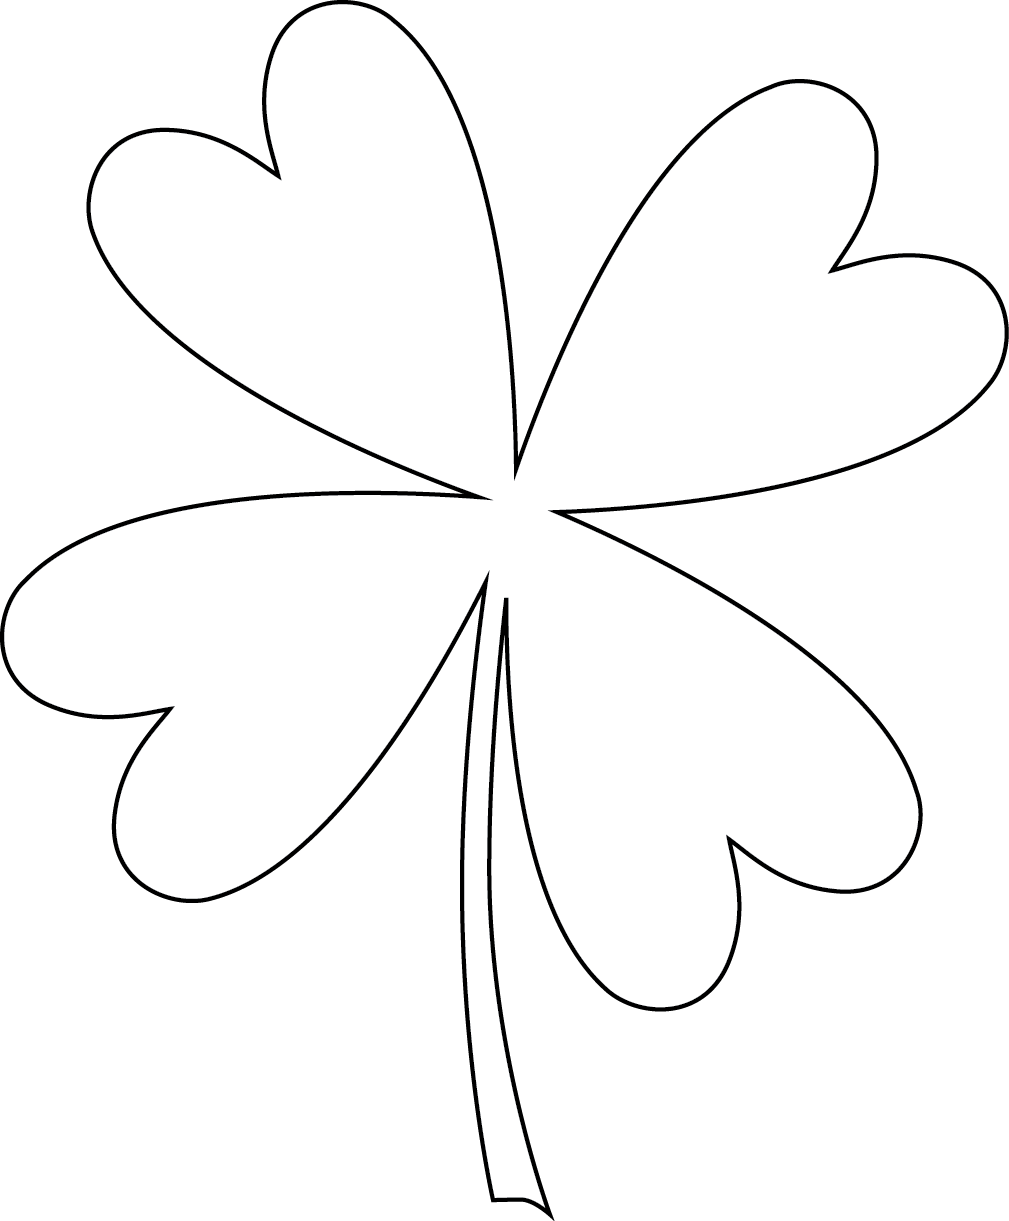 Four Leaf Clover Graphic PNG